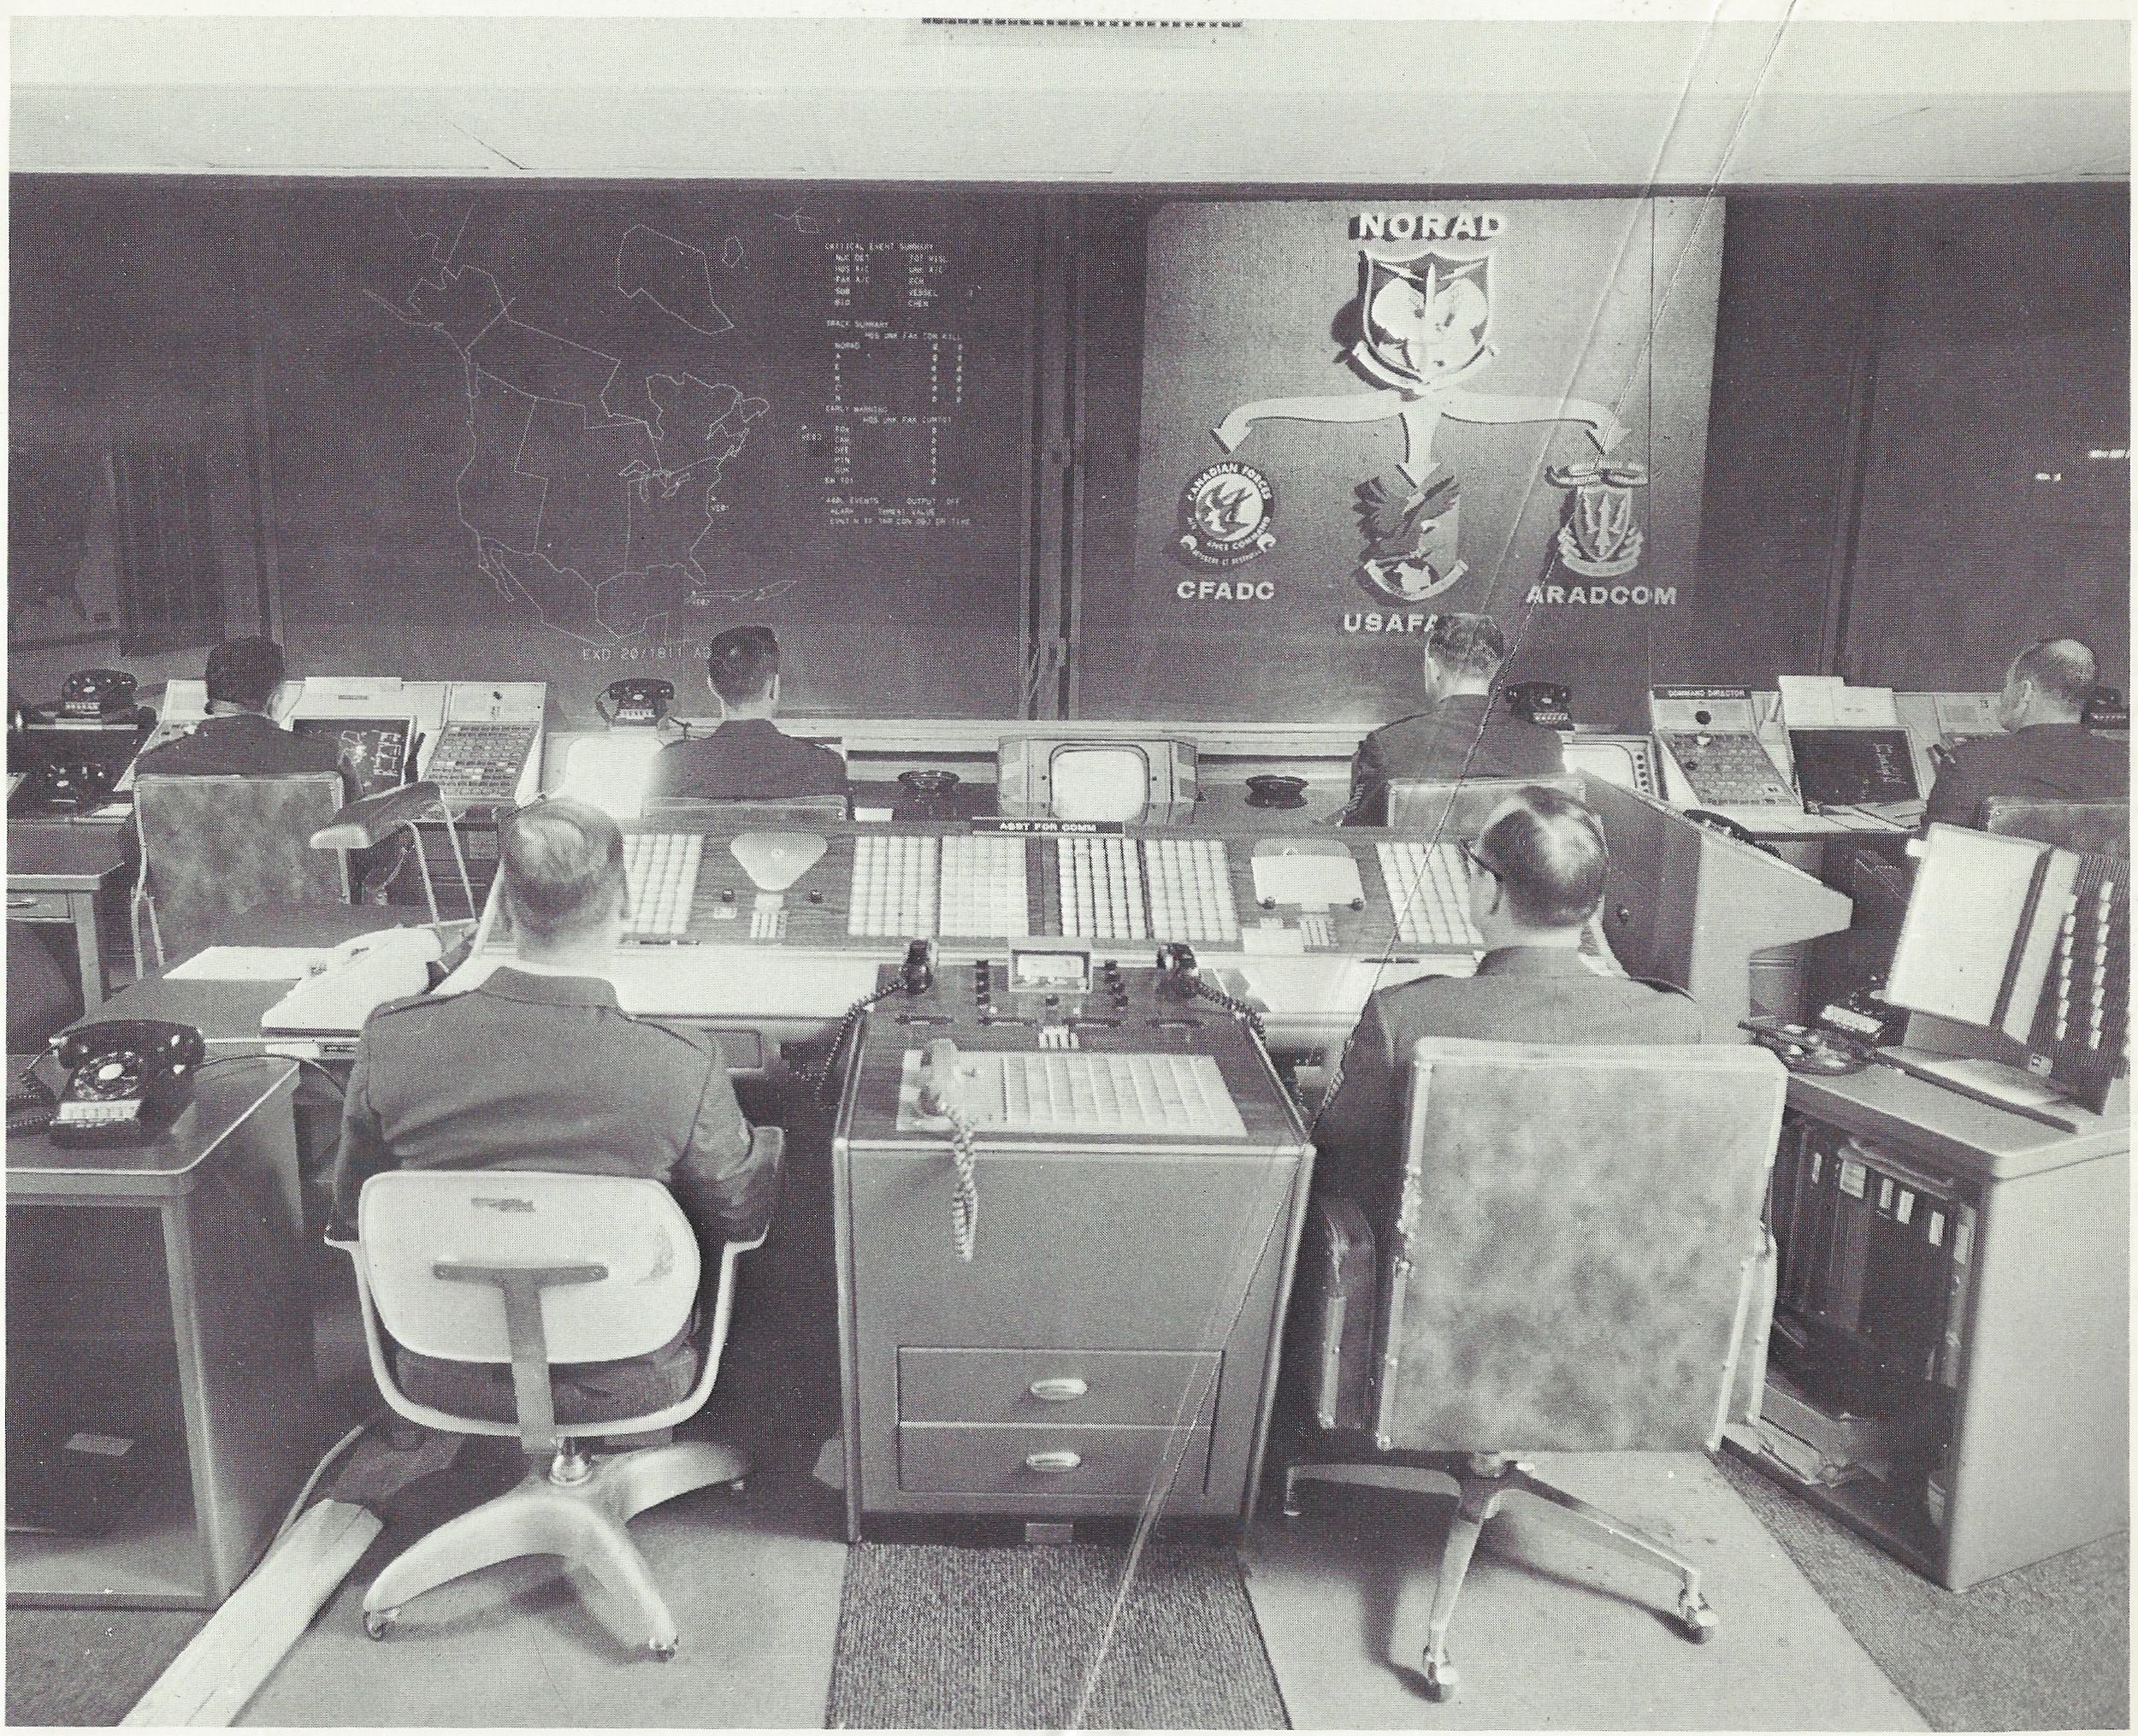  Caption: "AIR DEFENSE WATCH - These display screens would display signs of air attack against Canada and the United States. By pushing buttons, the NORAD battle staff members can take an electronic look at the tracks of space satellites or aircraft,